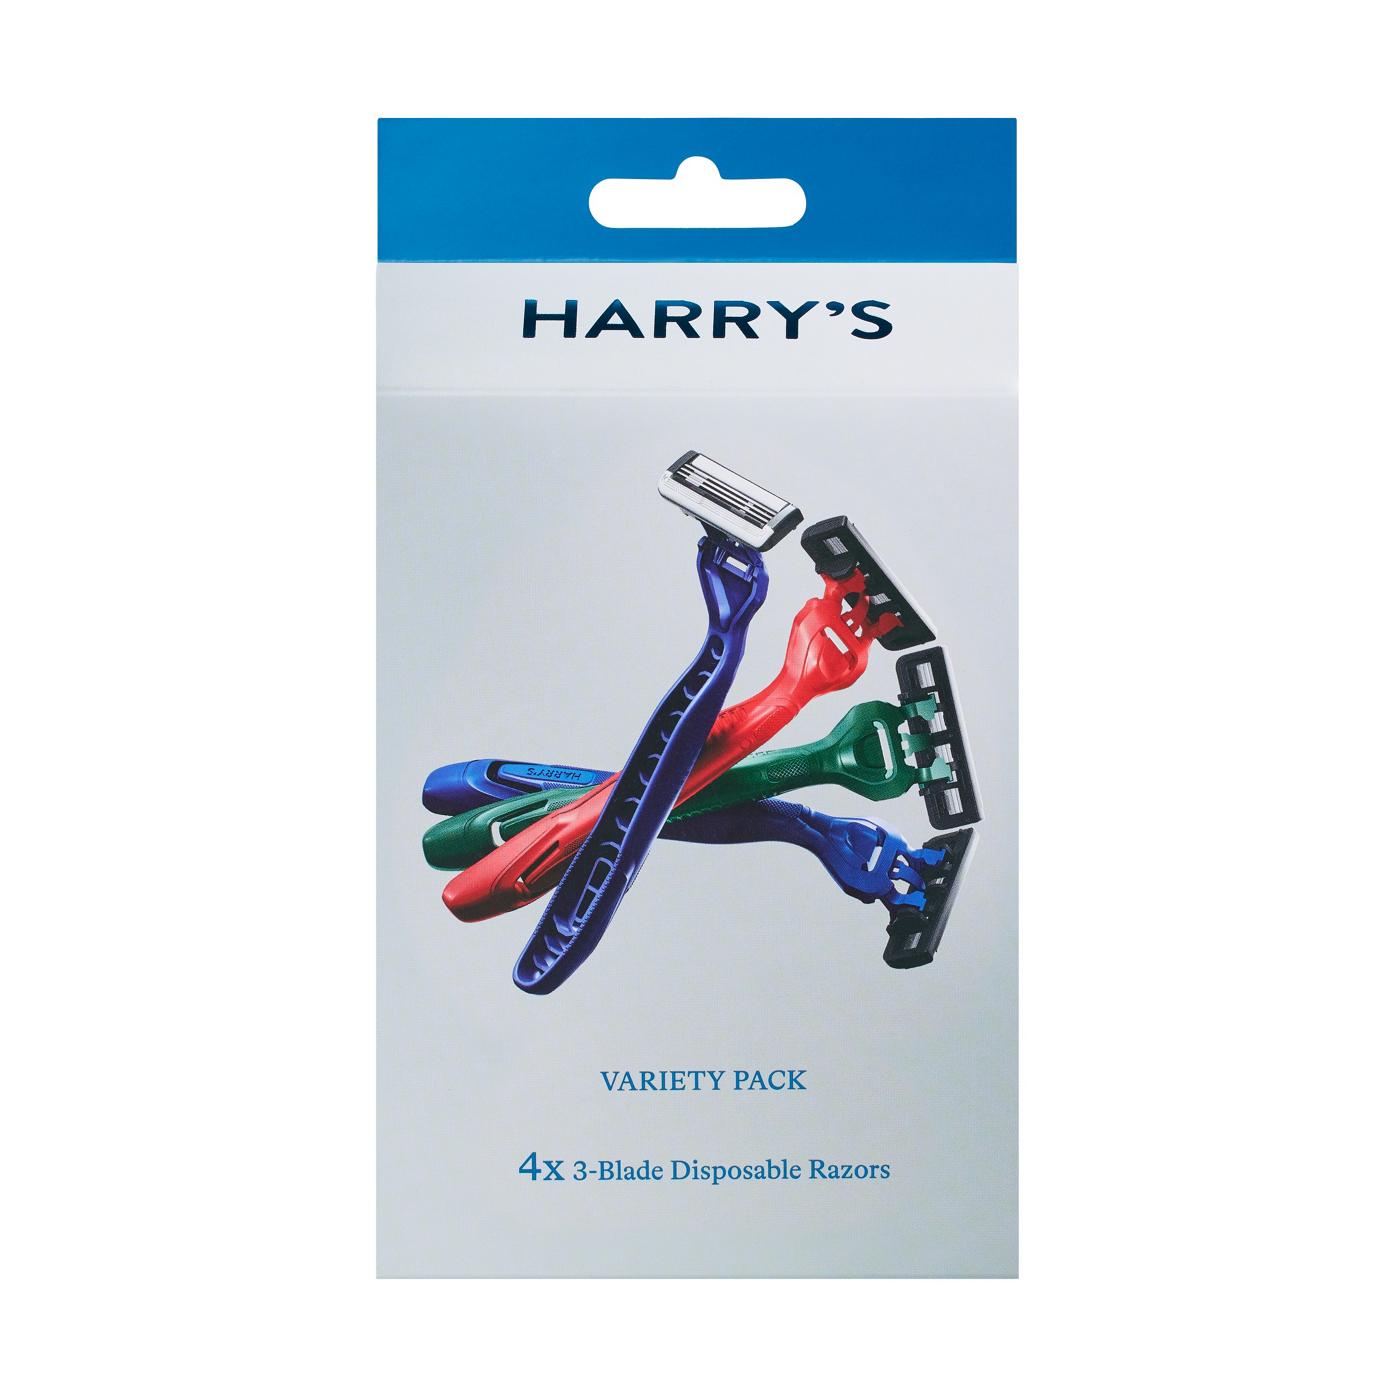 Harry's 3-Blade Disposable Razor Variety Pack; image 1 of 4